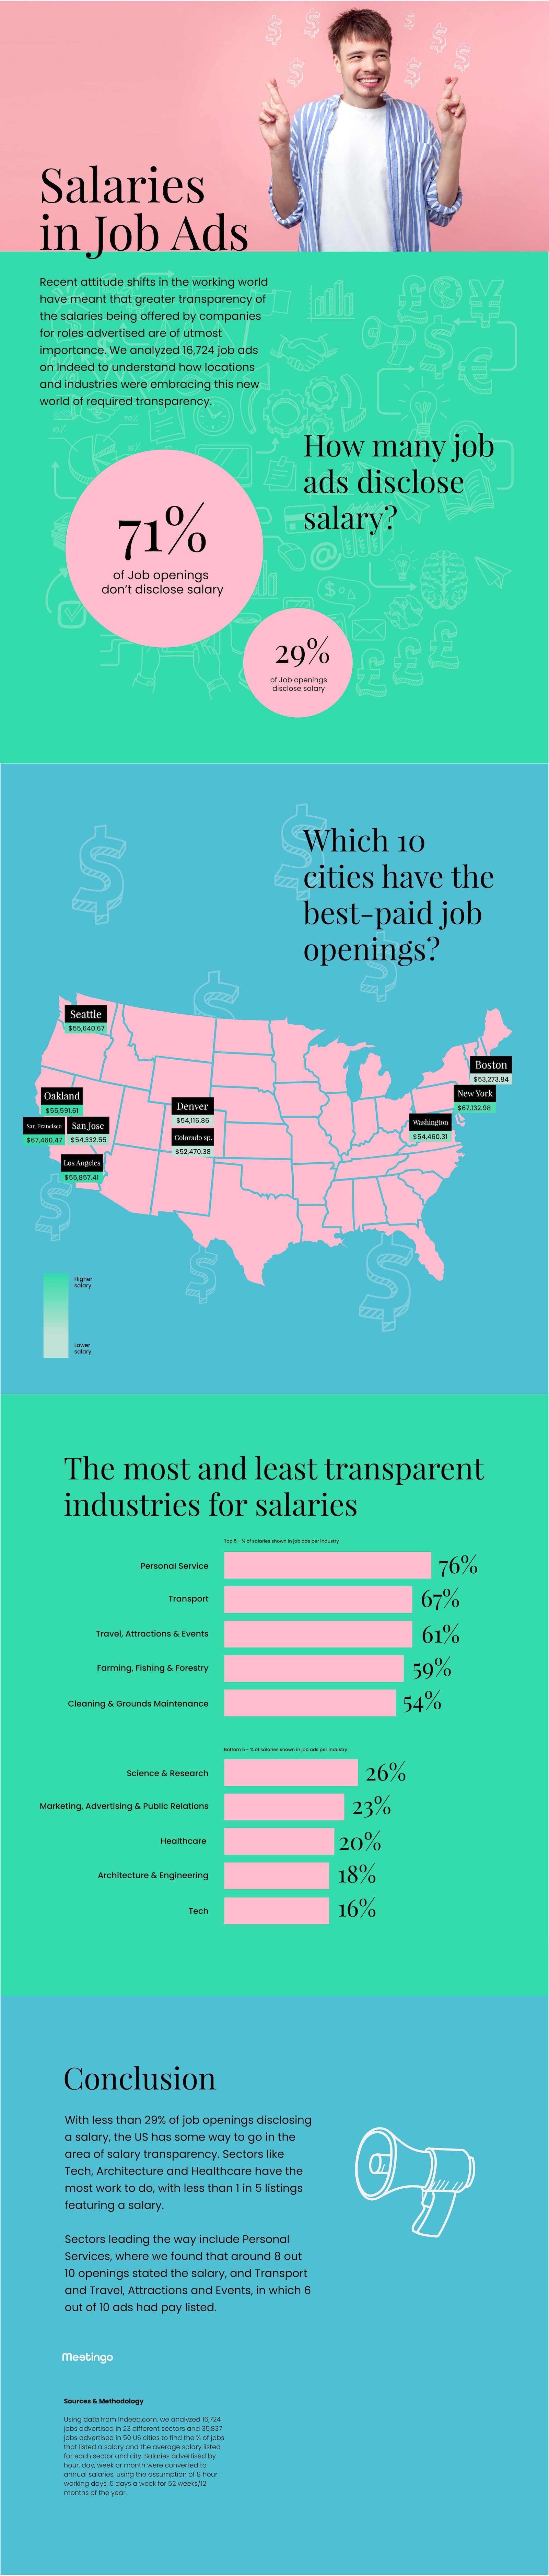 Infographic about salaries in job ads in the US, supported by the following blog post